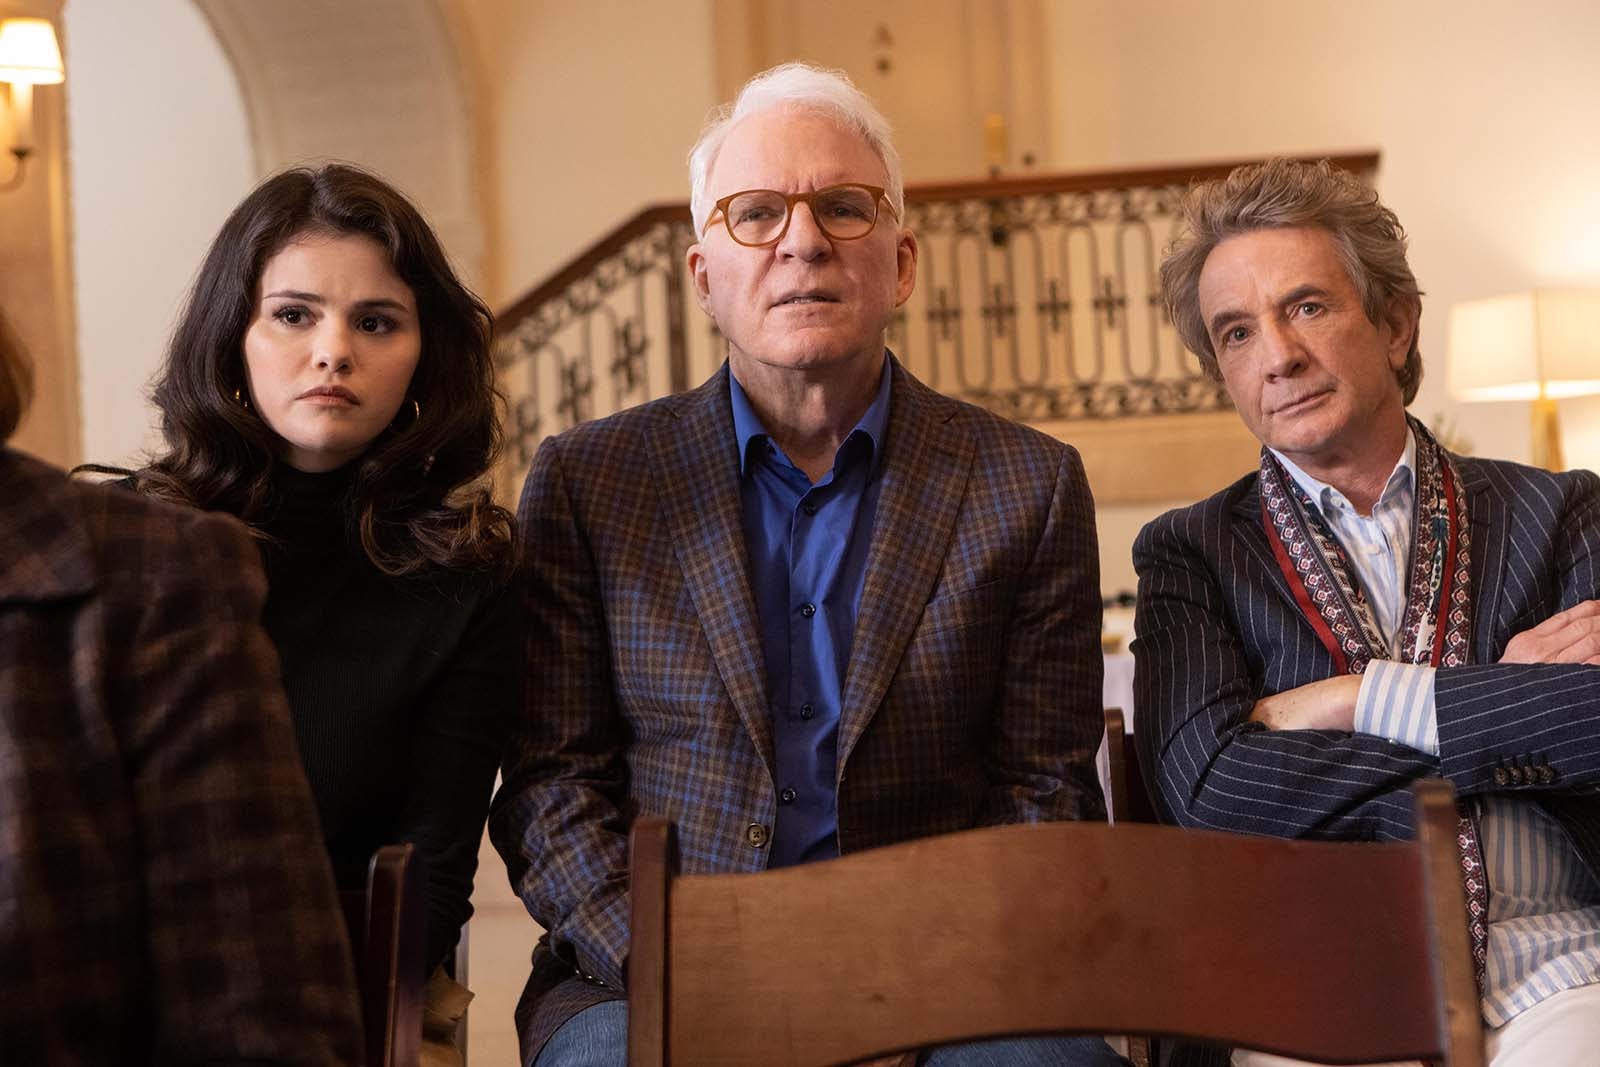 Selena Gomez, Steve Martin, and Martin Short star in Only Murders in the Building. Image © Hulu